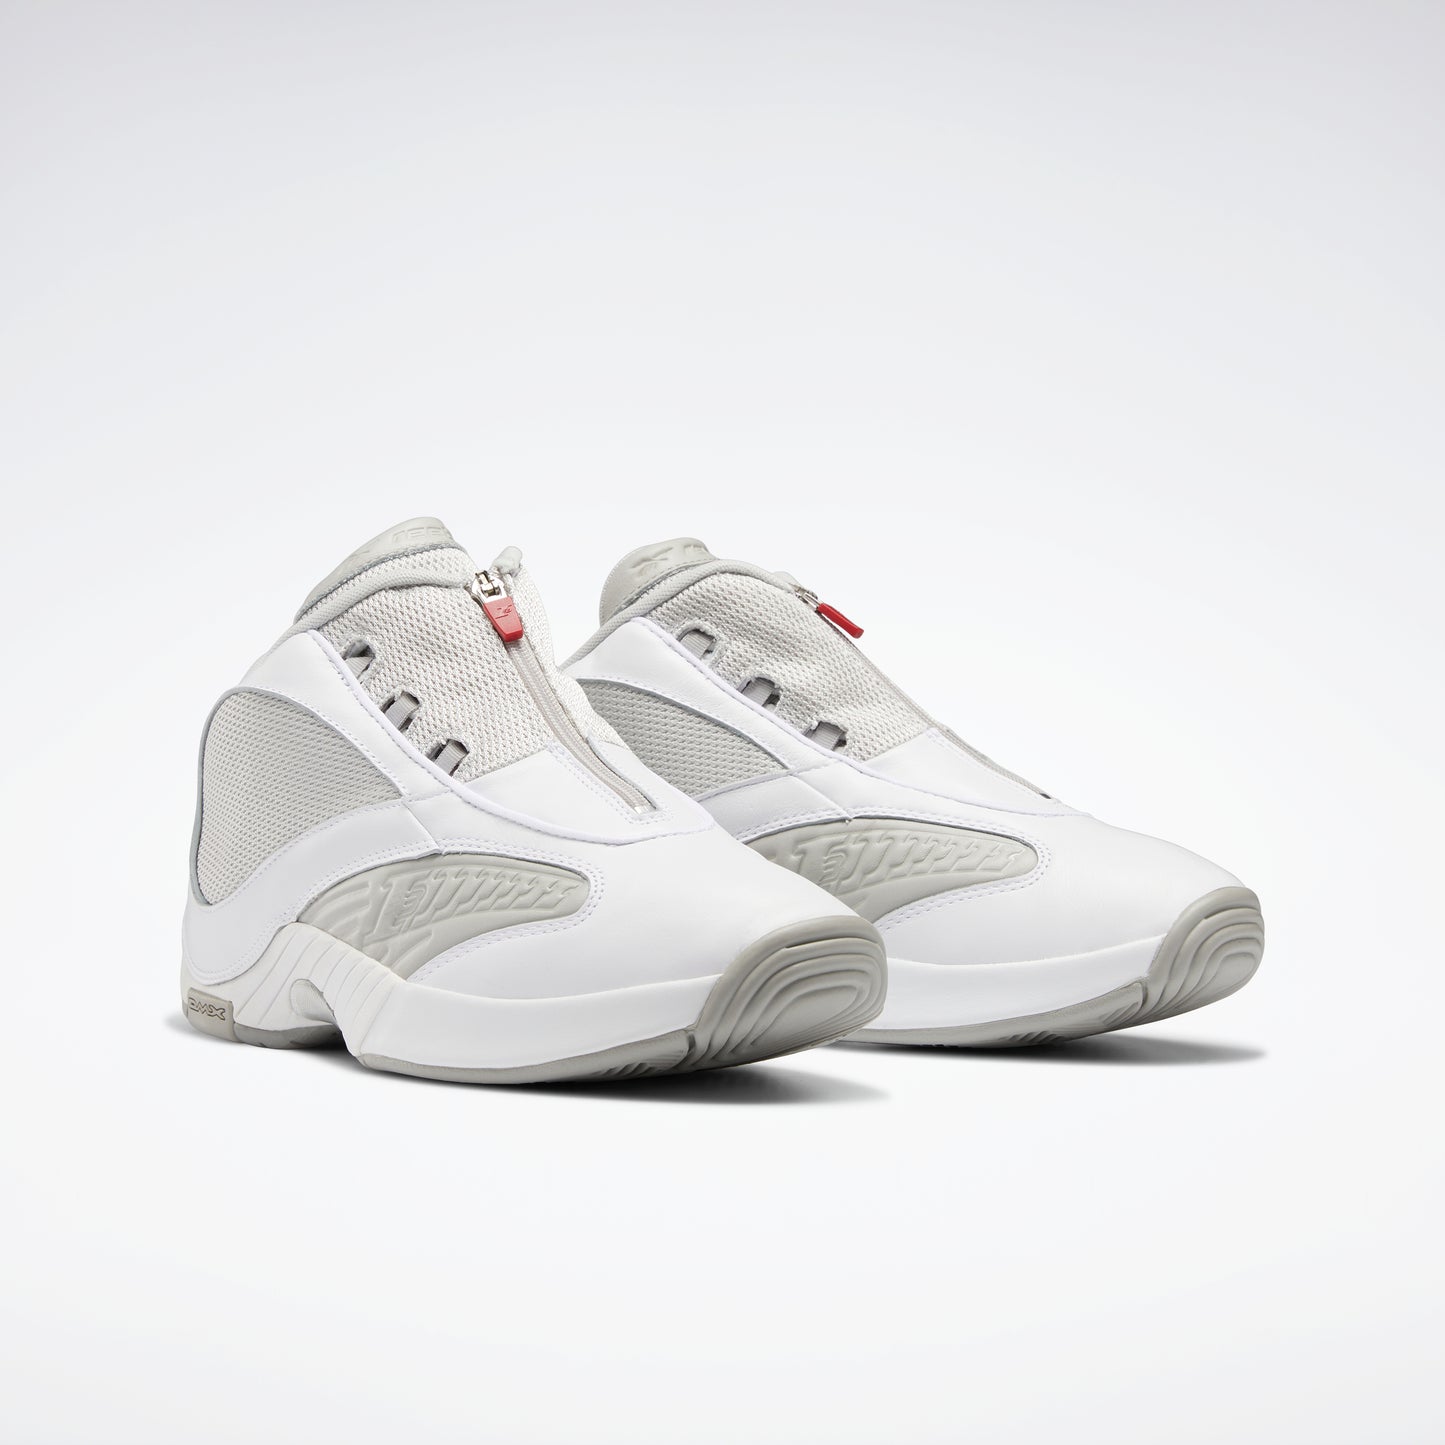 Chaussures Reebok Footwear Hommes Packer Answer Iv Chaussures Ftwwht/Flared/Snogre